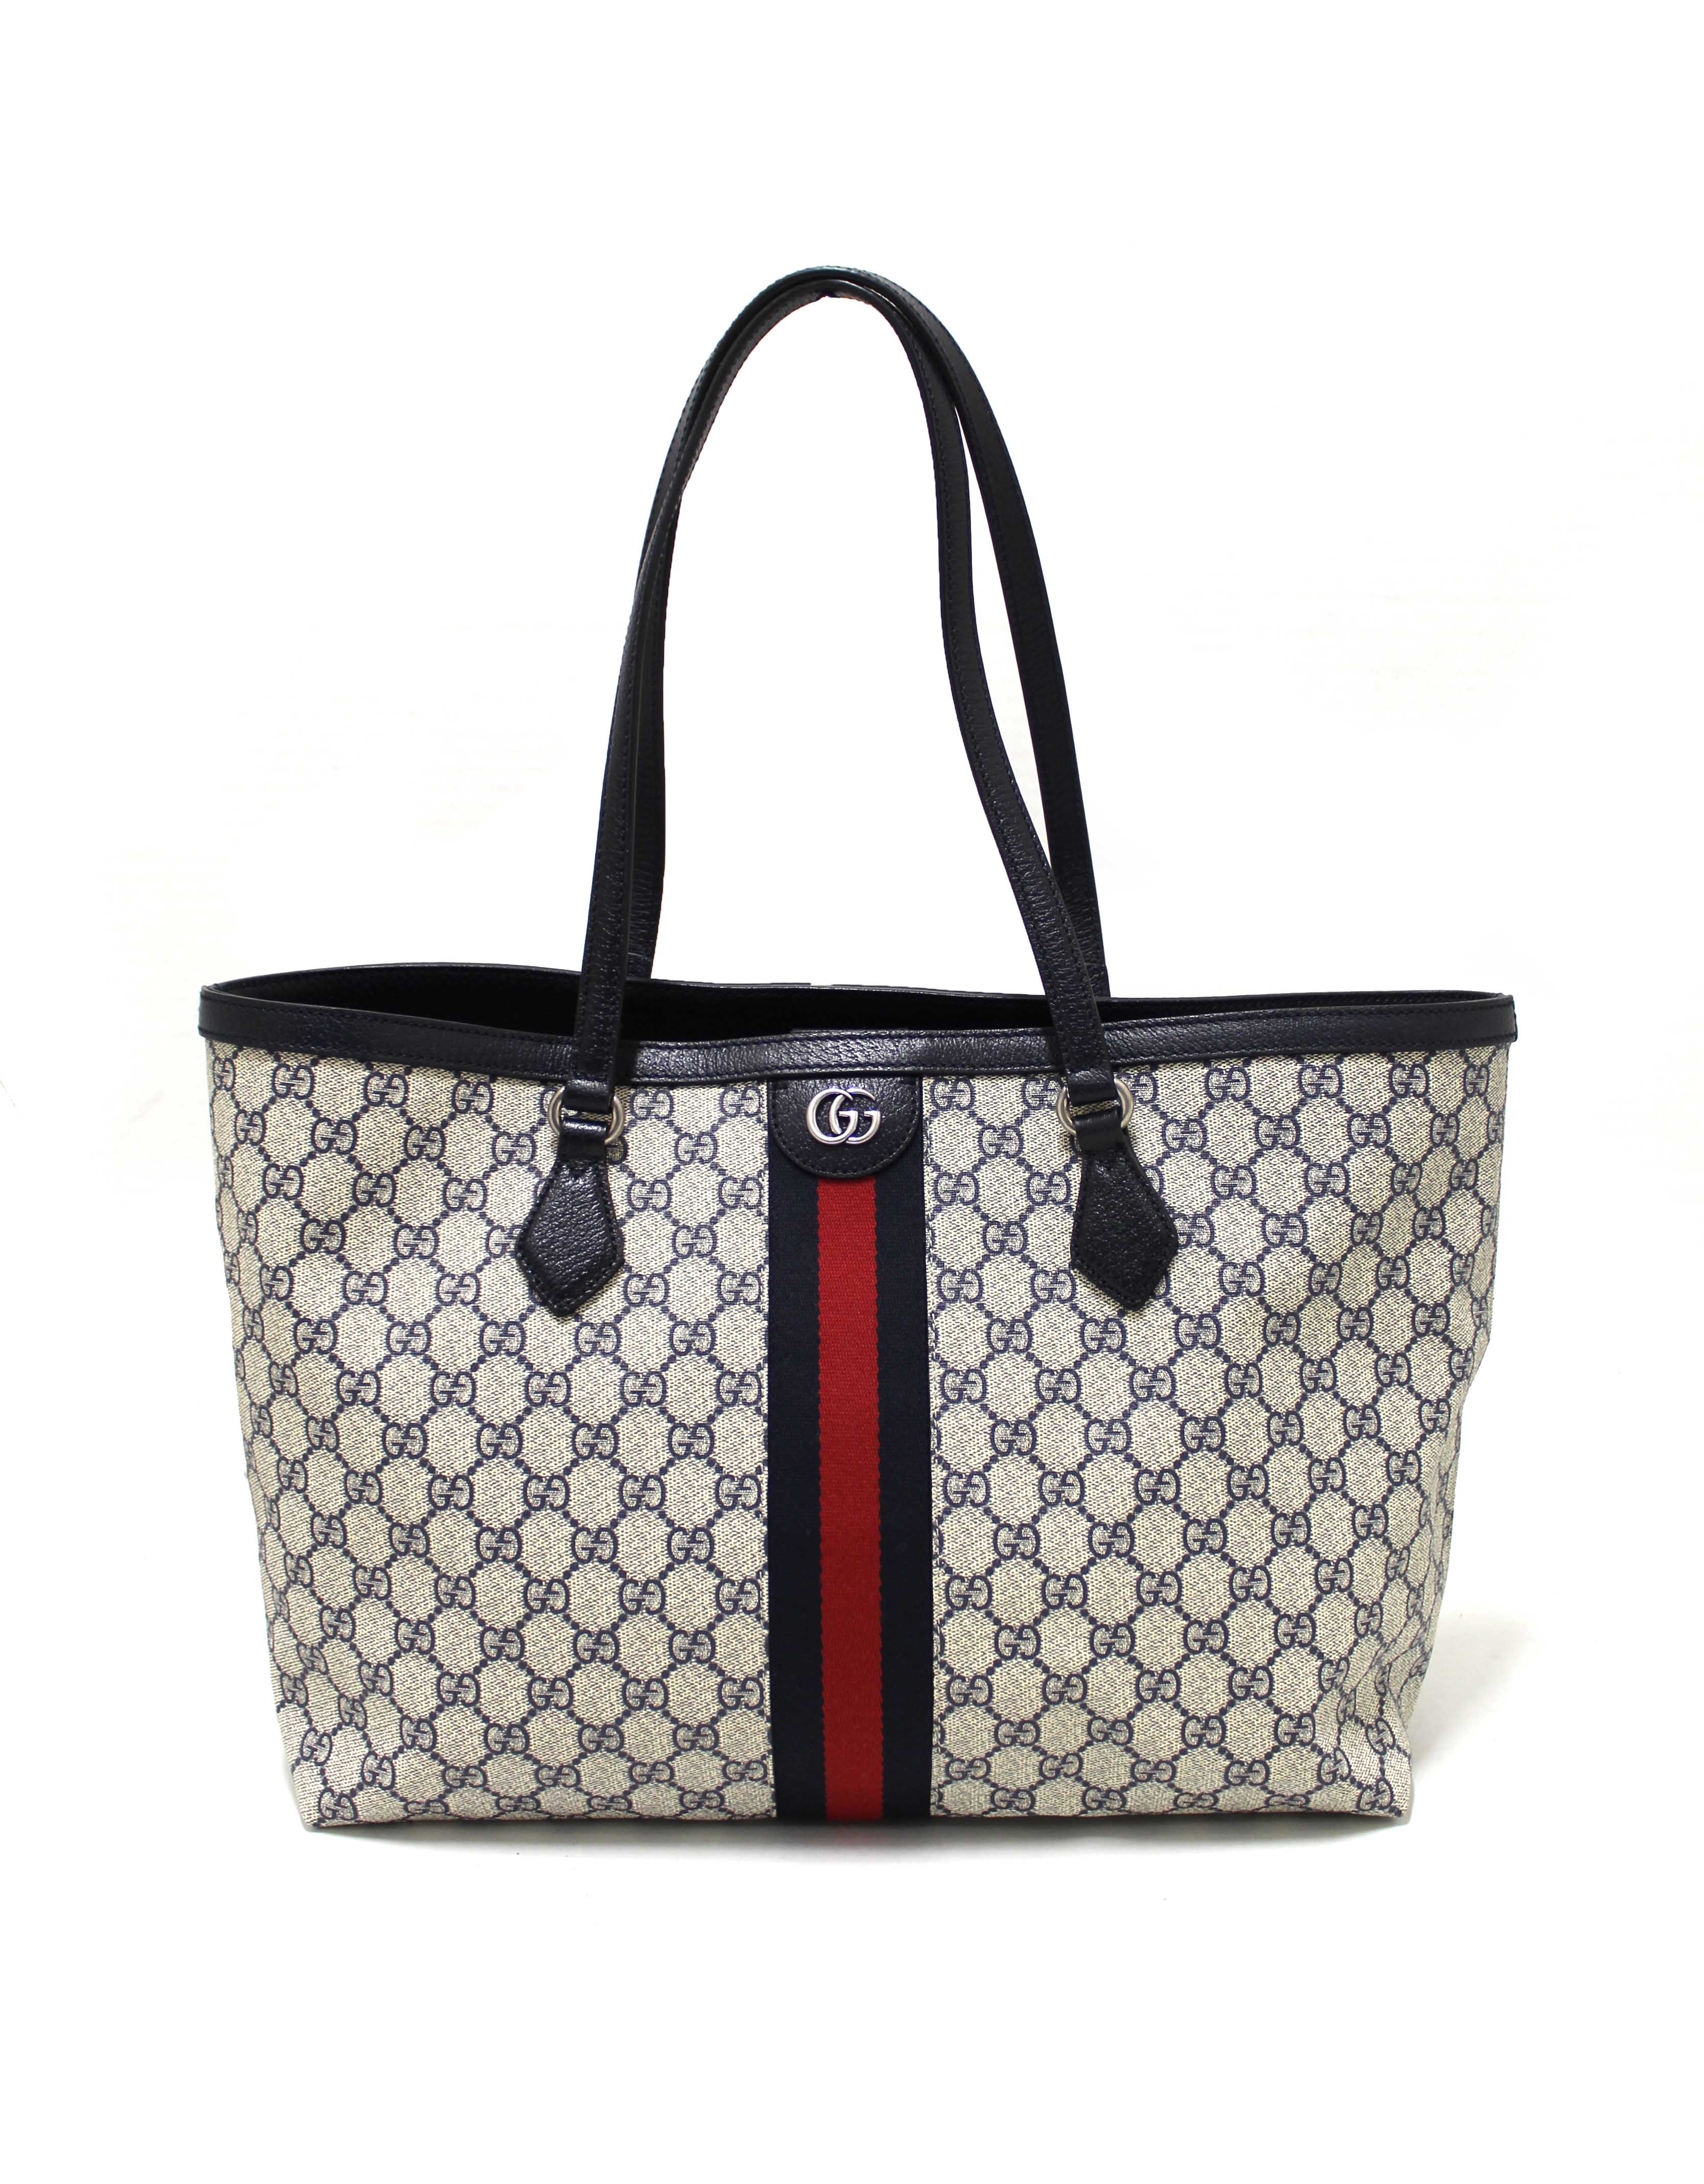 Authentic Gucci Navy Blue Ophidia GG Large Shoulder Tote Bag